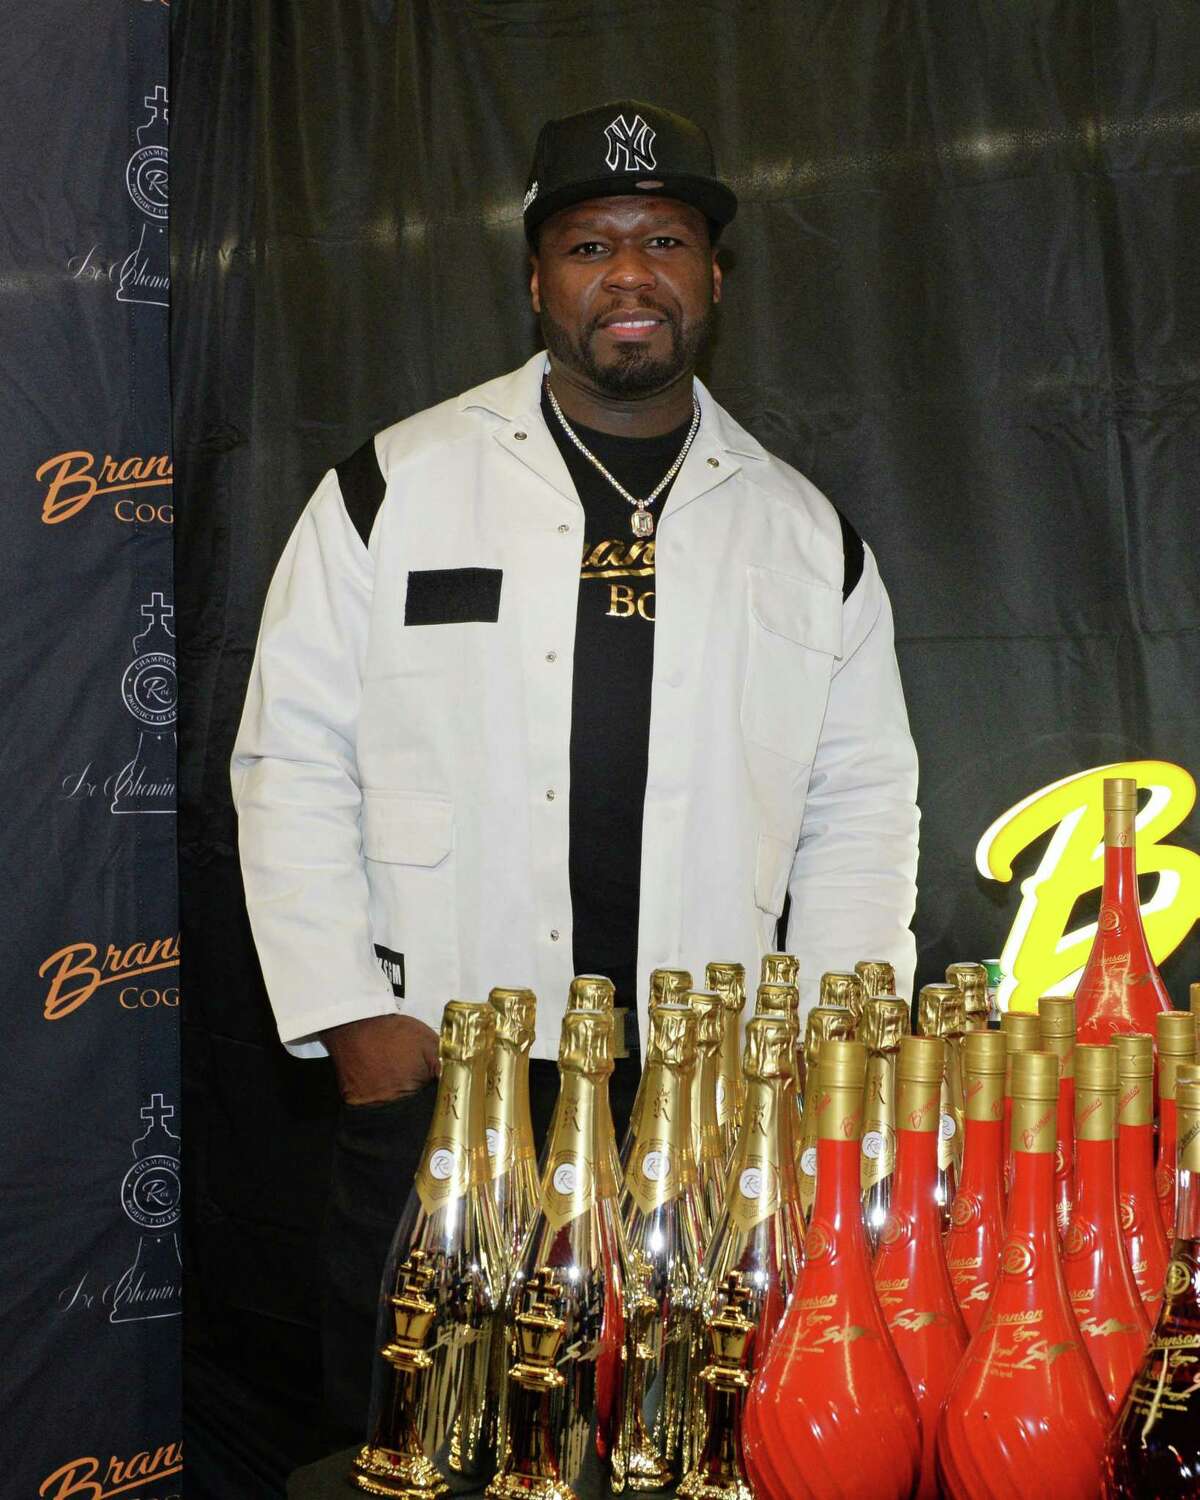 50 Cent stops in Houston area to promote lines of champagne, cognac